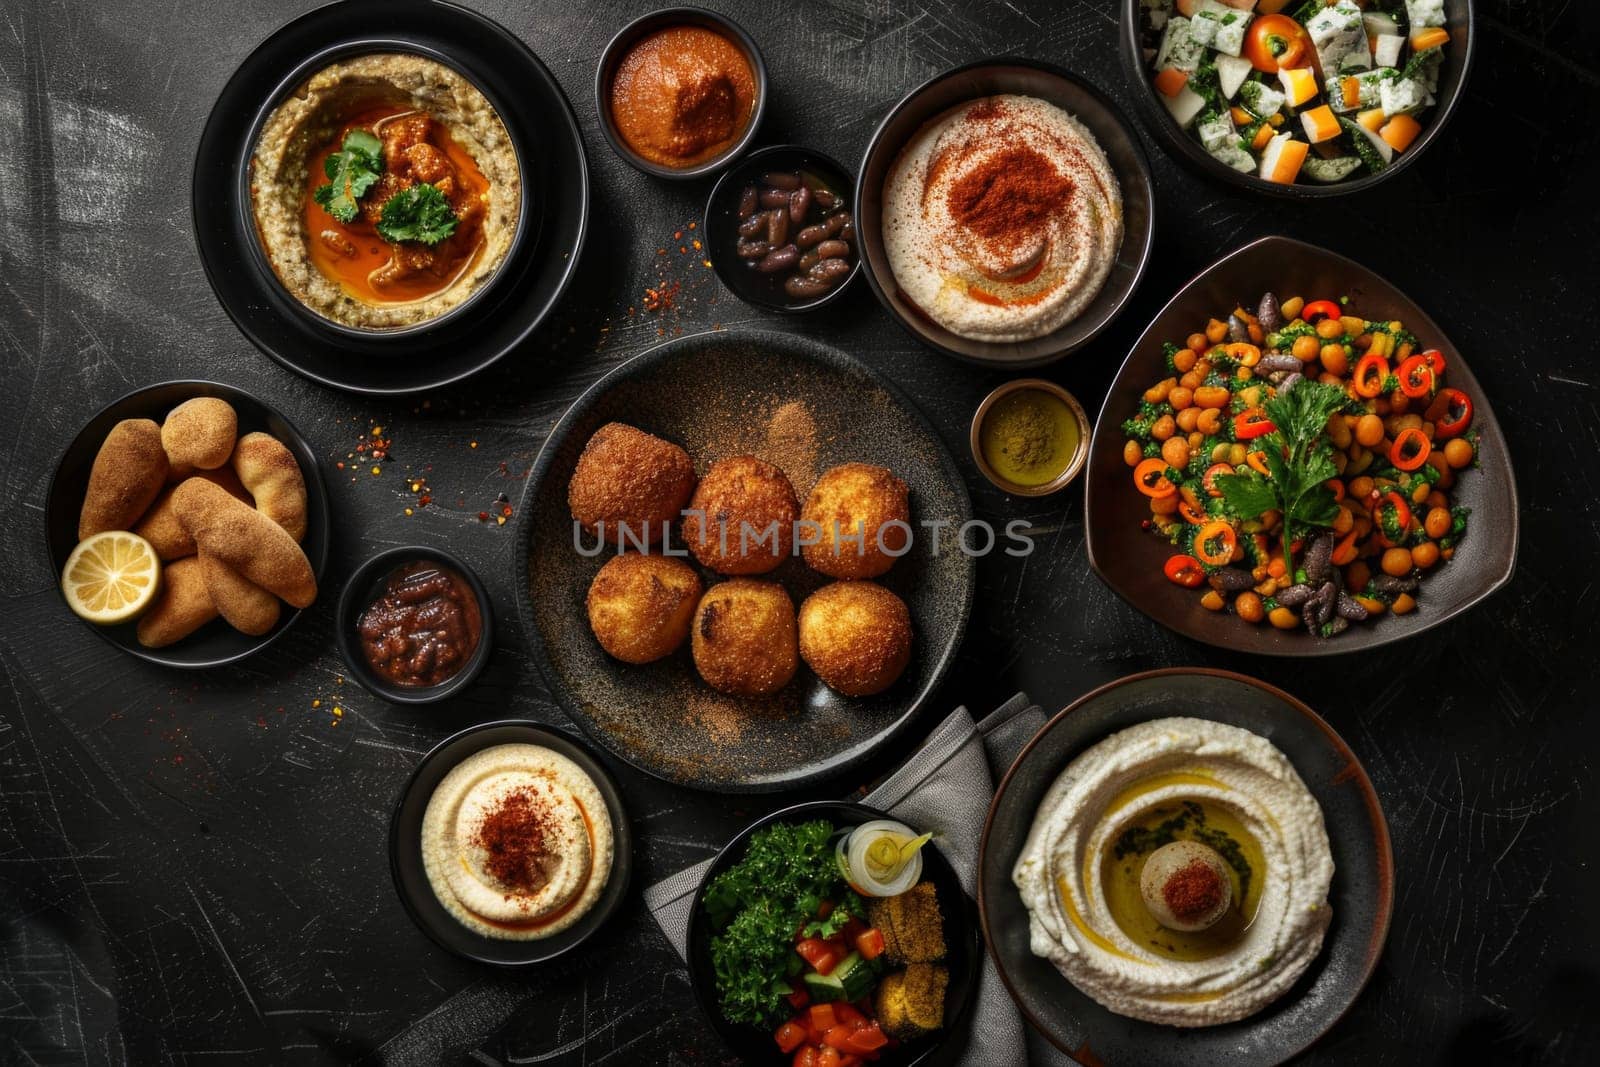 Top view of arabic food with a variety of dishes including hummus and falafel. Horizontal.